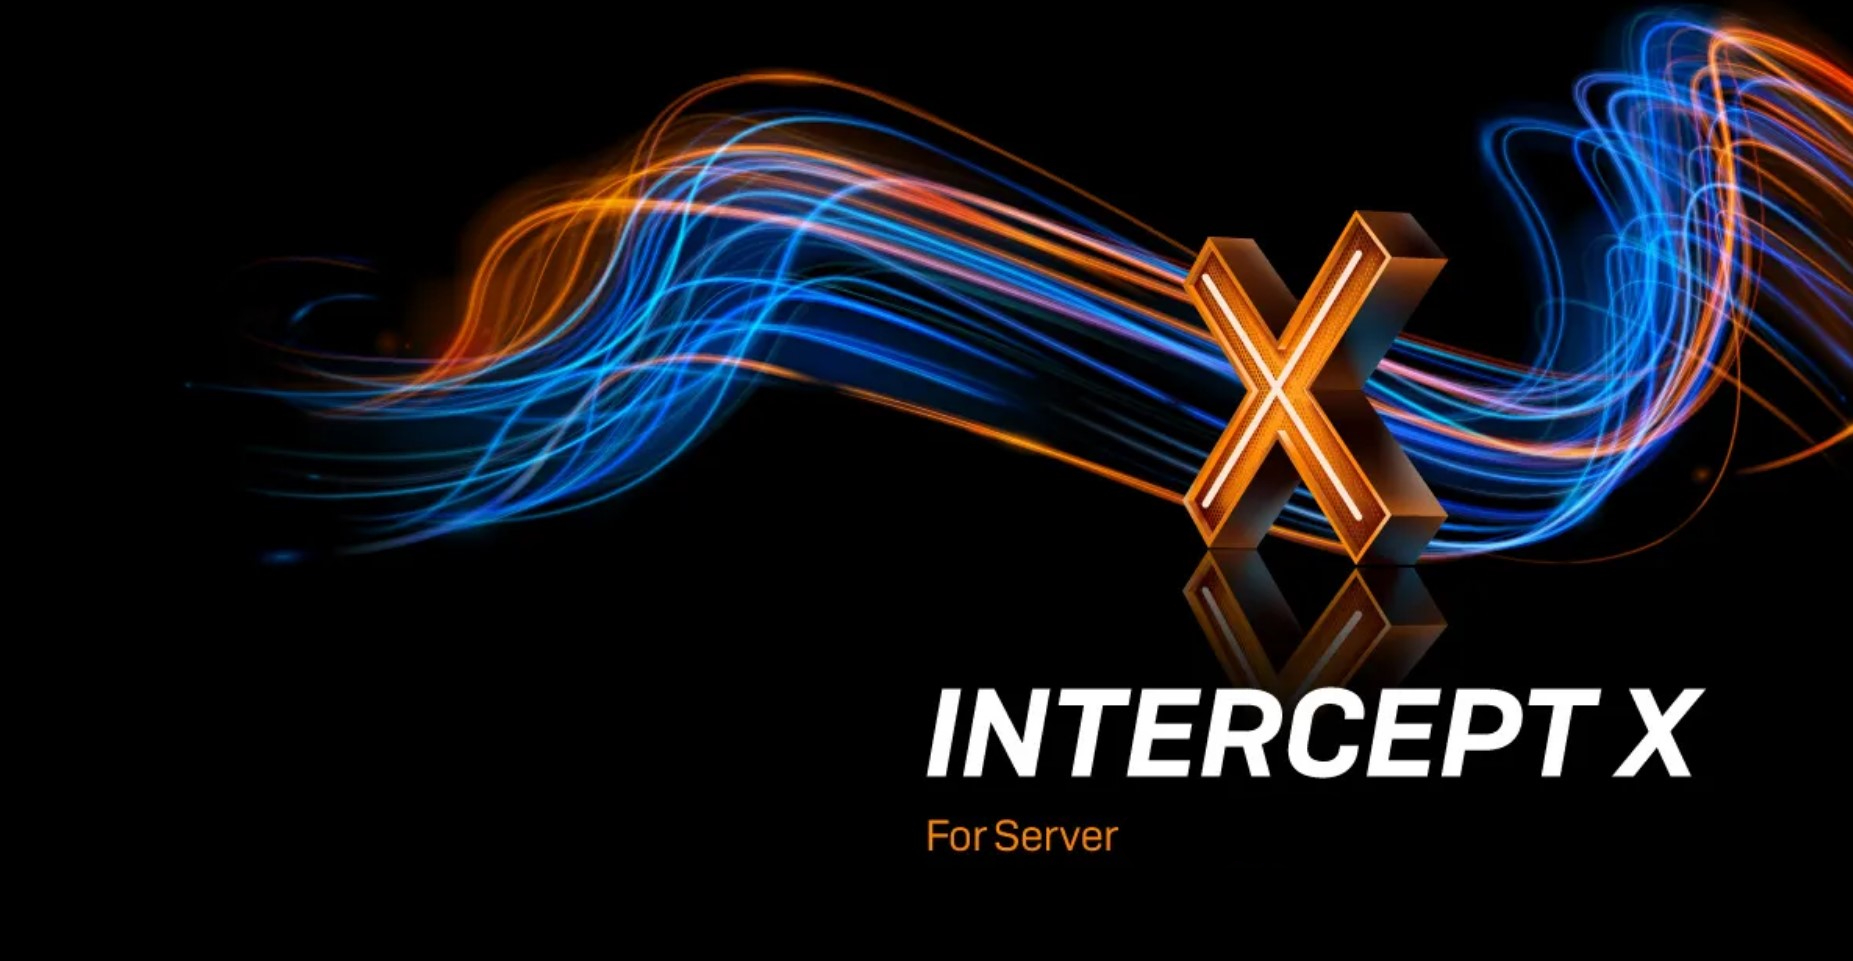 Key Features of Intercept X Advanced with XDR for Server